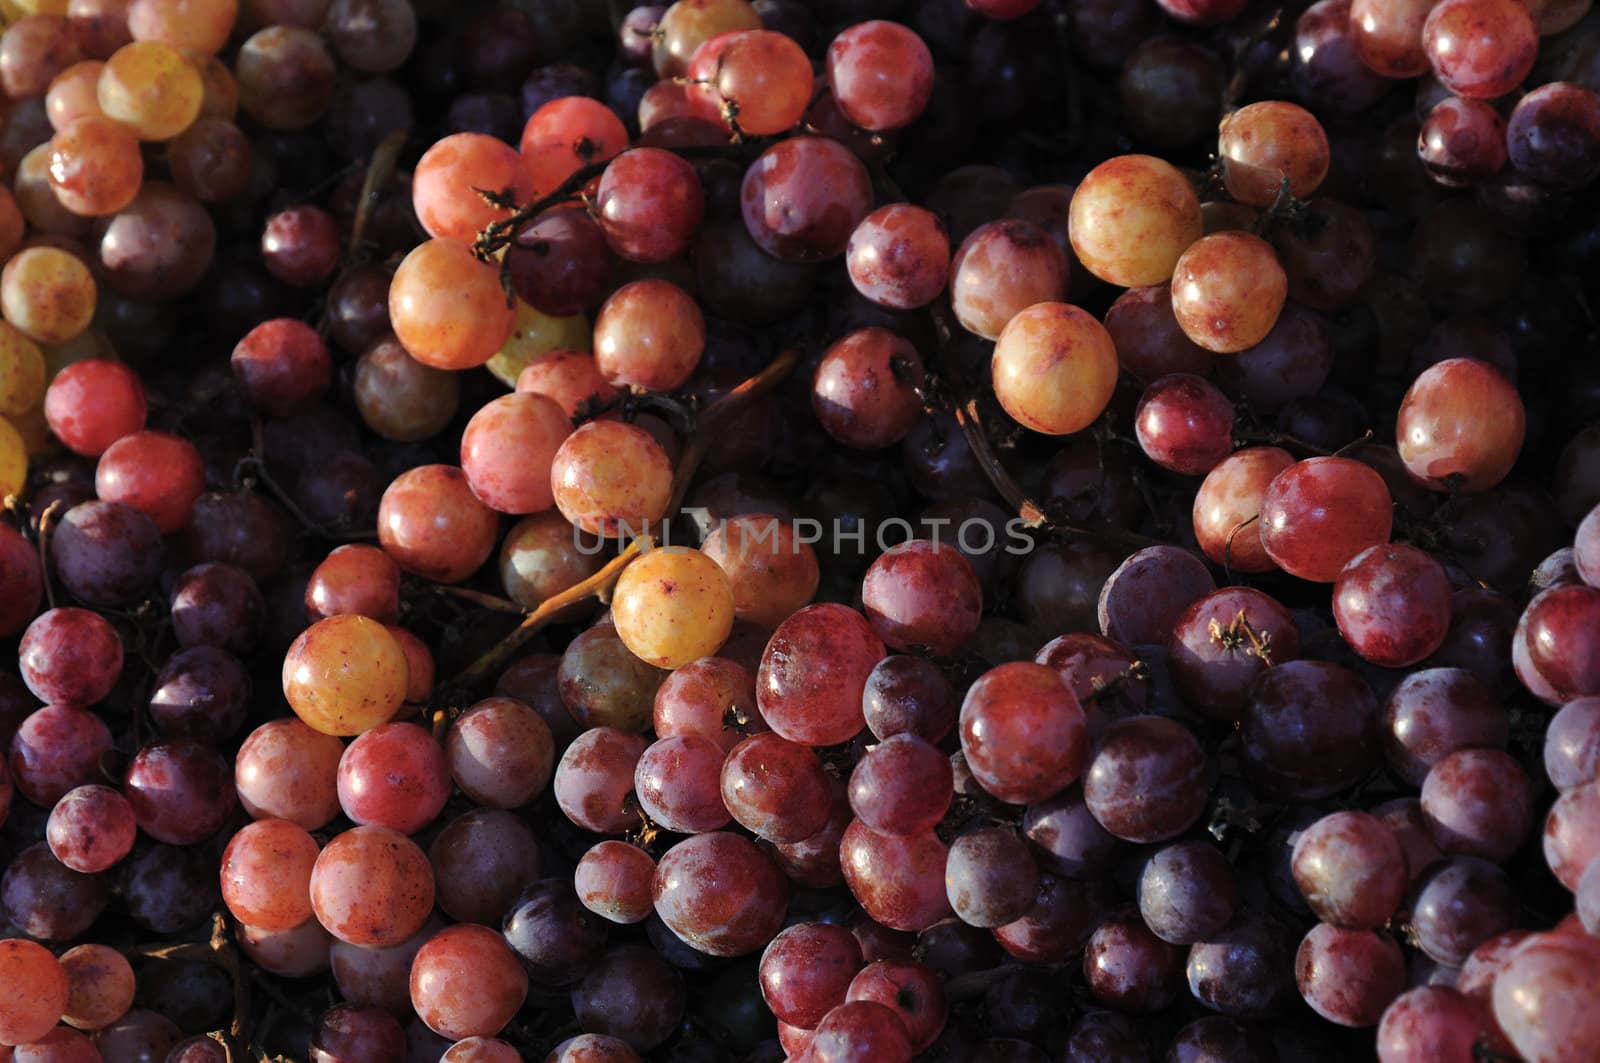 A pile of red grapes at a farmer's market